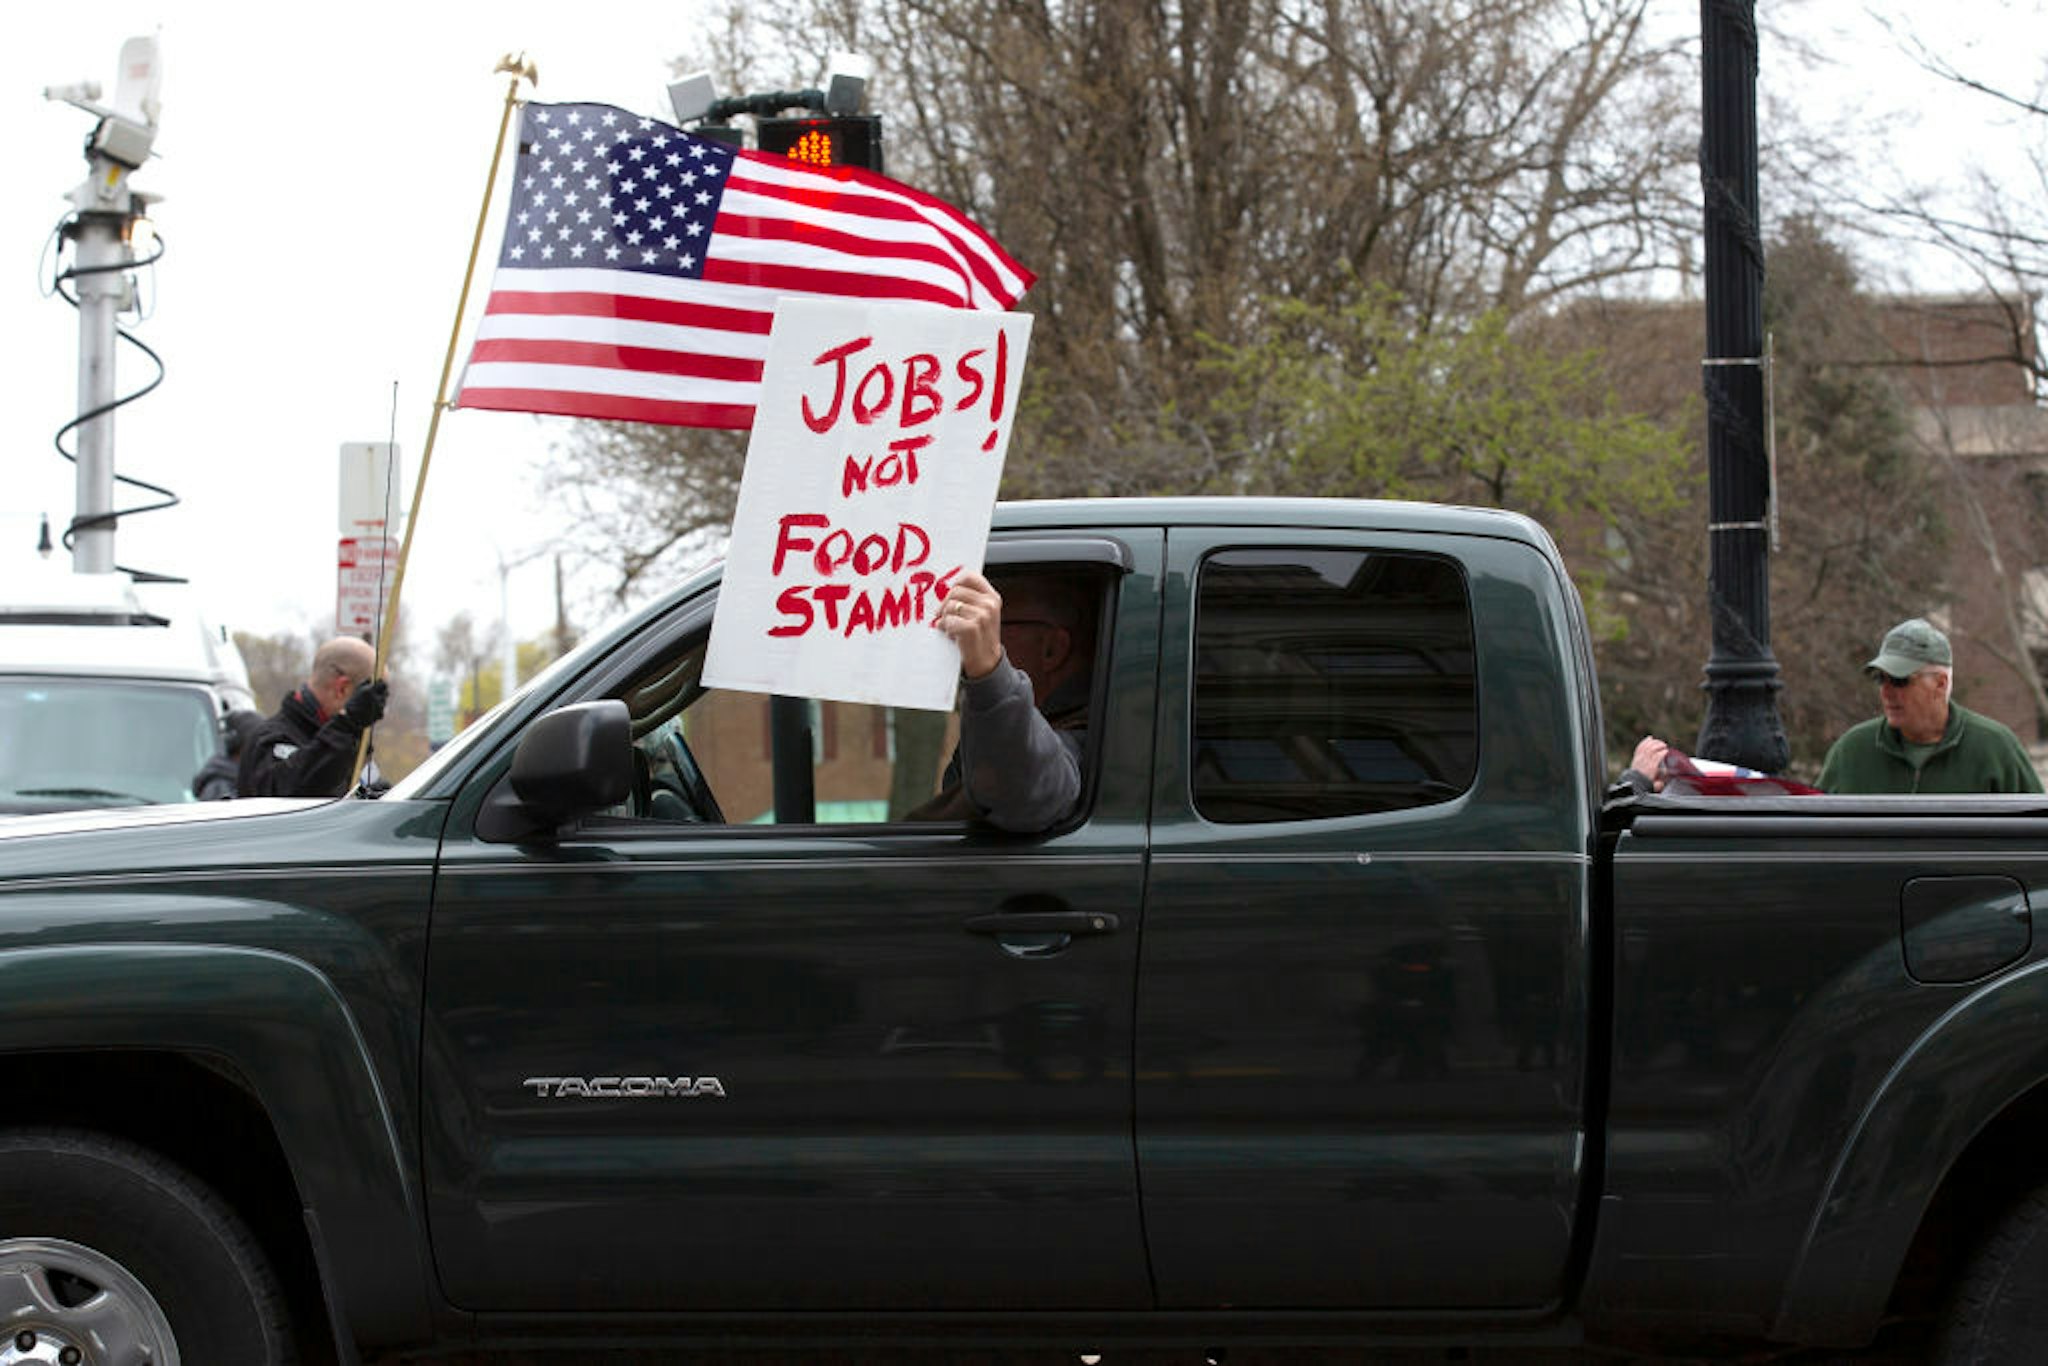 ALBANY, NY - APRIL 22: A protestor holds a sign out the window of their vehicle during an Operation Gridlock protest outside of the New York State Capitol Building on April 22, 2020 in Albany, New York. Protestors are calling on New York State Governor Andrew Cuomo to reopen New York State amidst a shutdown of all non-essential businesses due to the Coronavirus pandemic. (Photo by Stefani Reynolds/Getty Images)